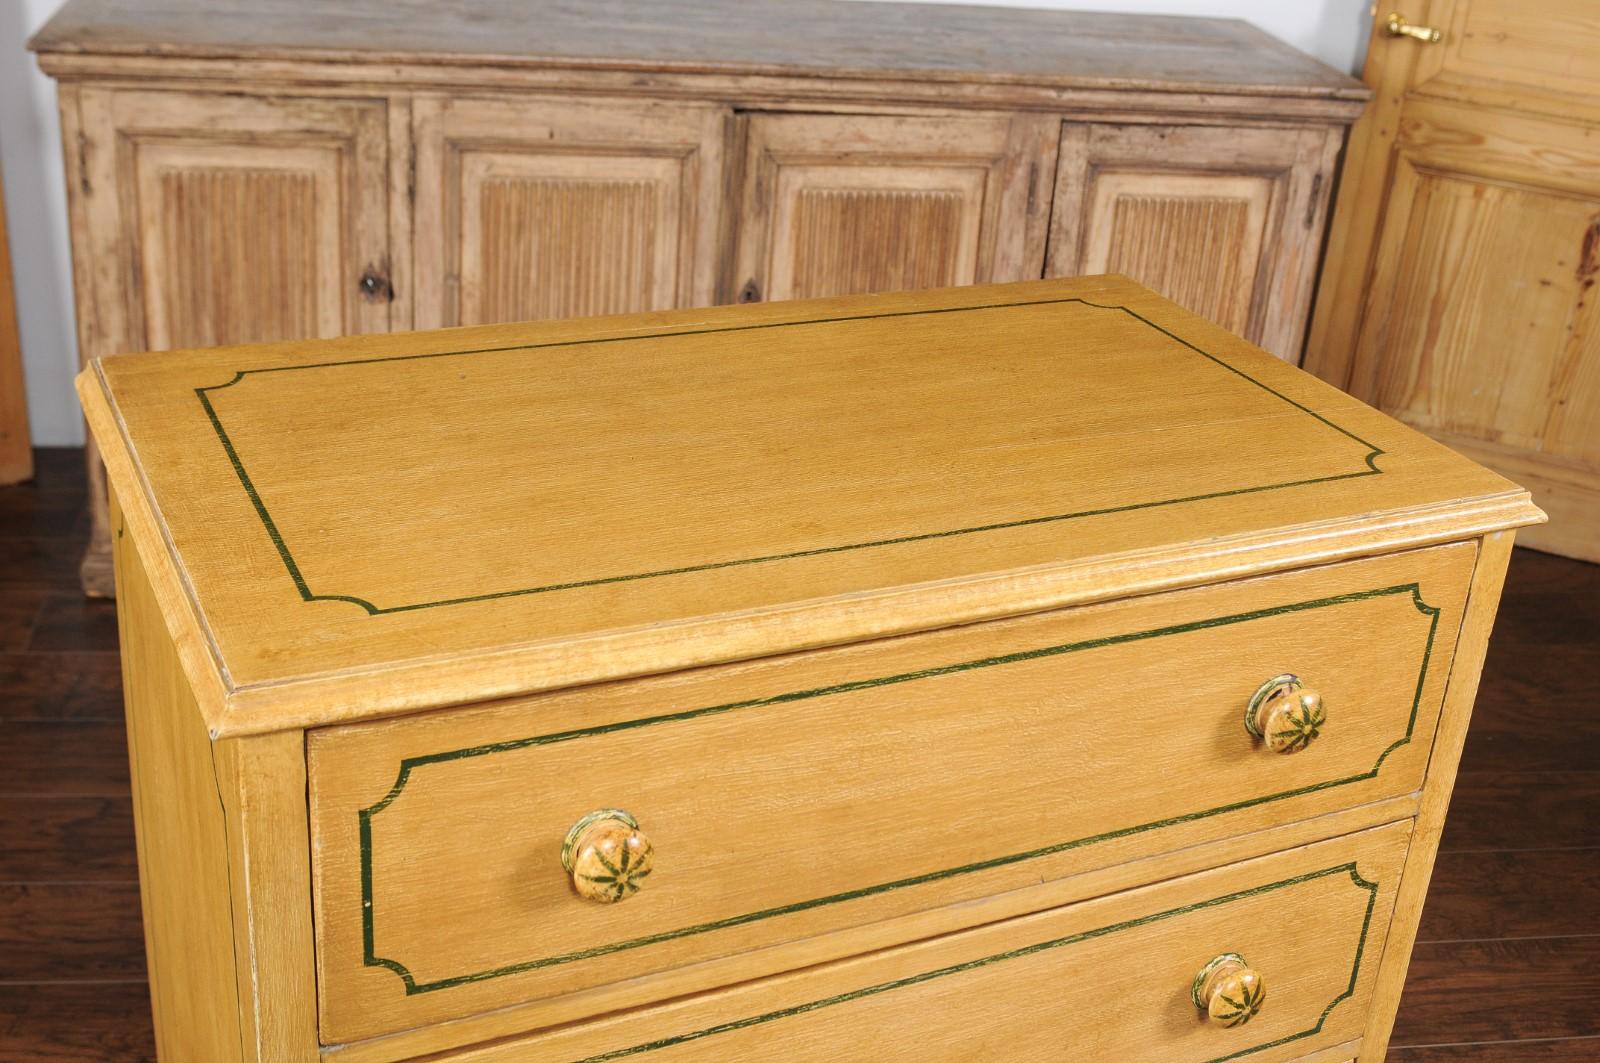 20th Century English 1950s Vintage Painted Three-Drawer Commode with Yellow Painted Finish